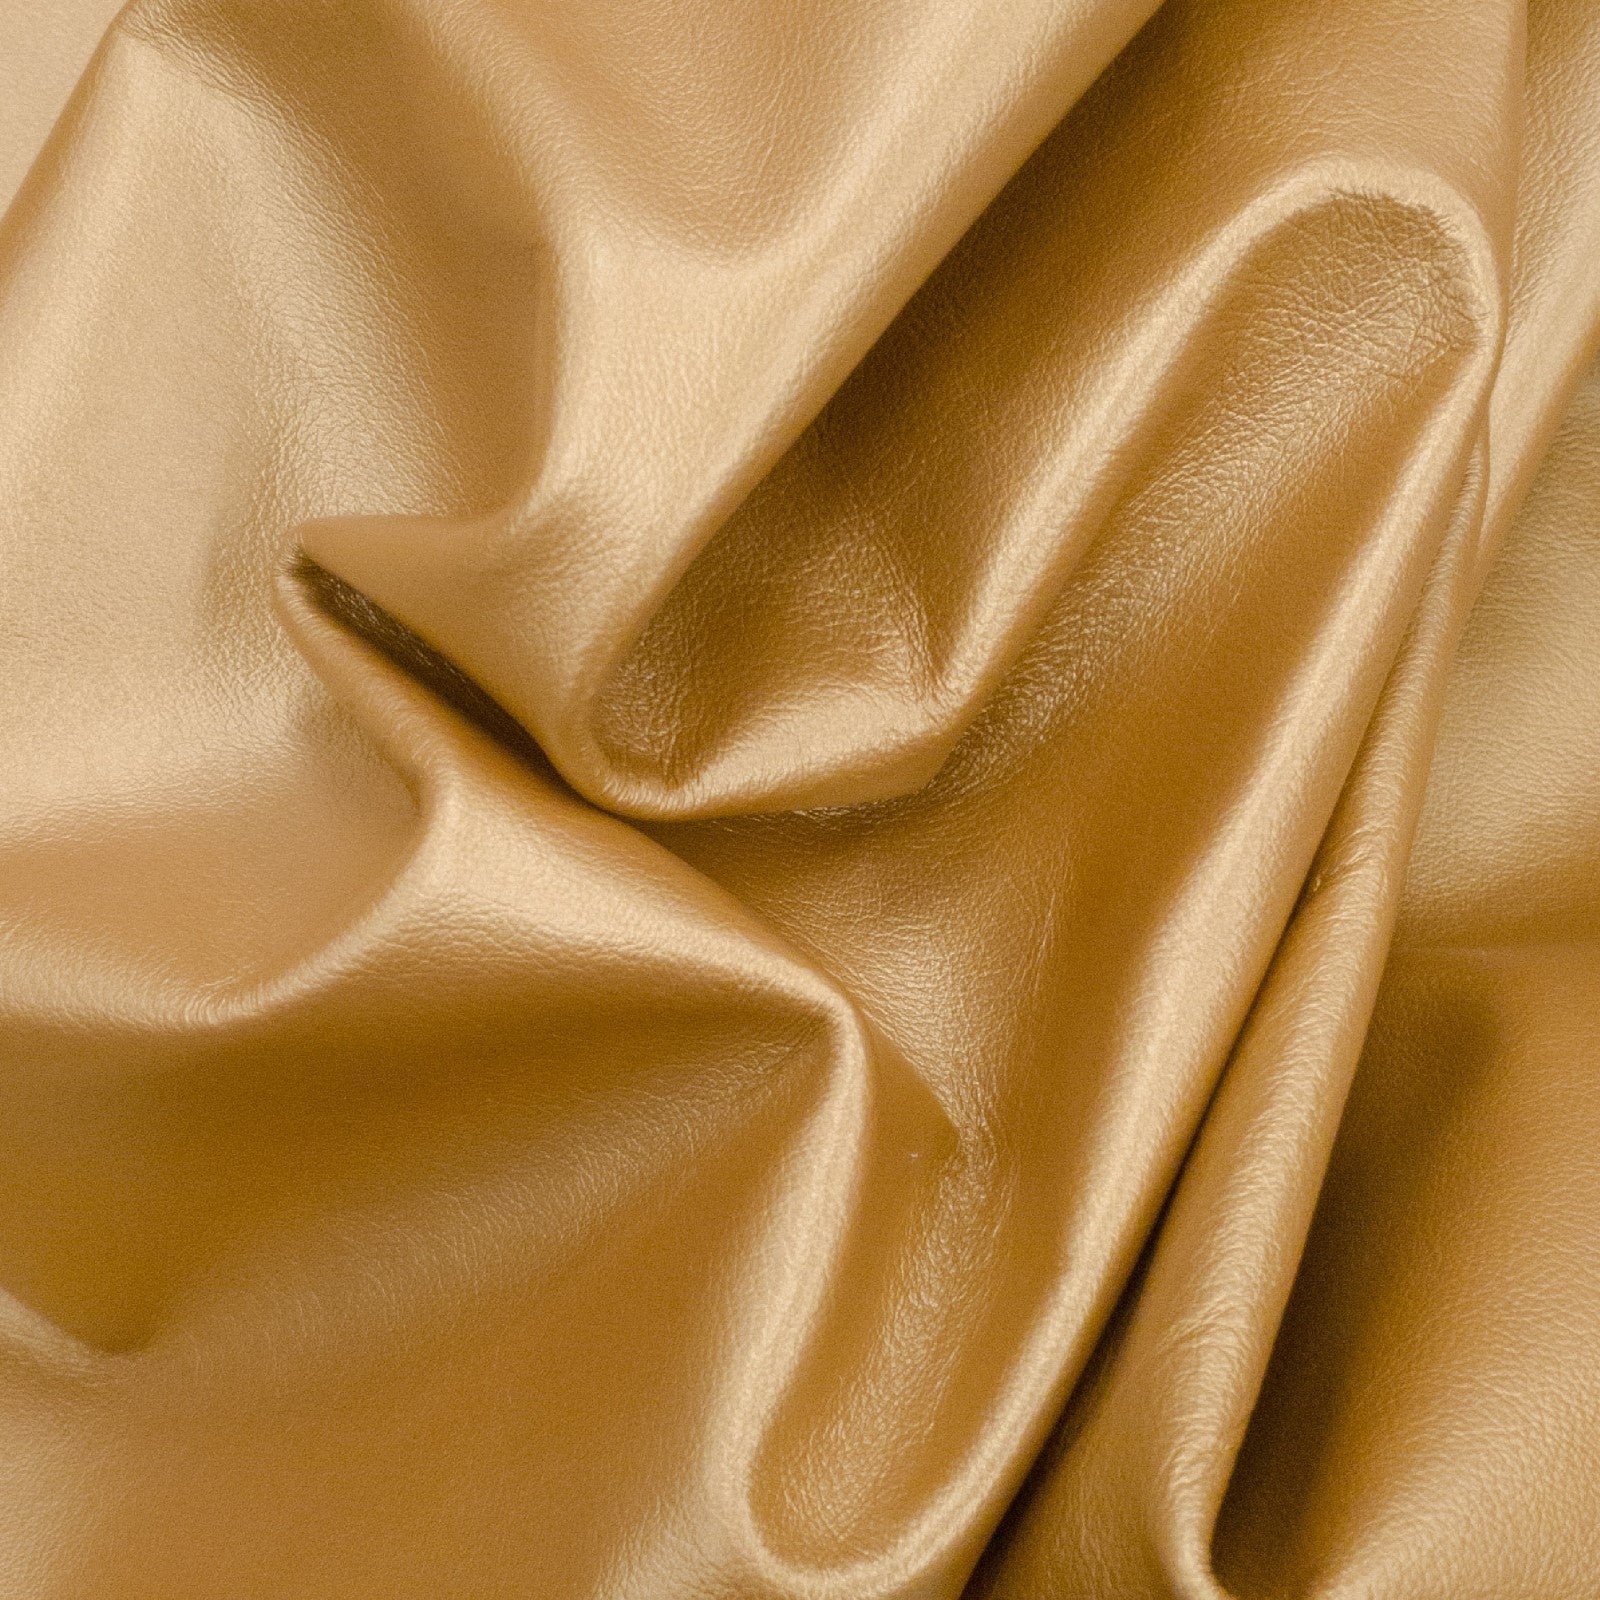 Light Brown, 2-4 oz, 33-64 SqFt, Full Upholstery Cow Hides, Pearl Golden Hour (Low-Grade) / 49-56 / 3-4 | The Leather Guy